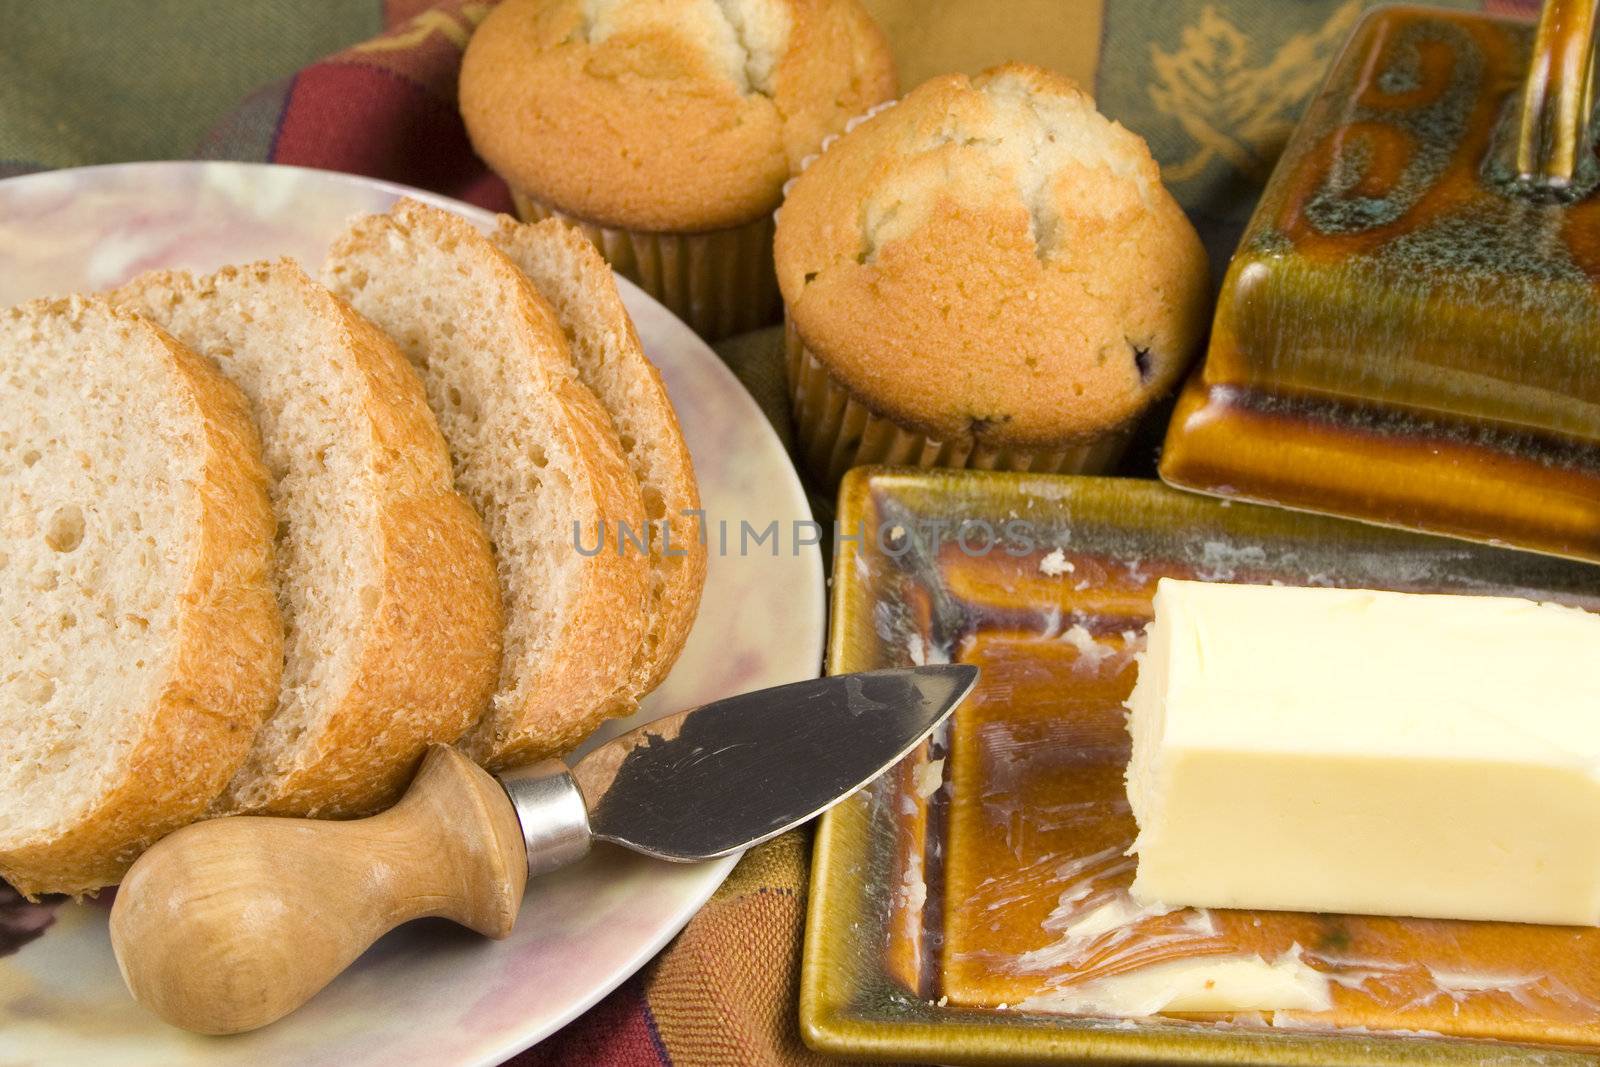 Bread and muffins with butter pad and plate